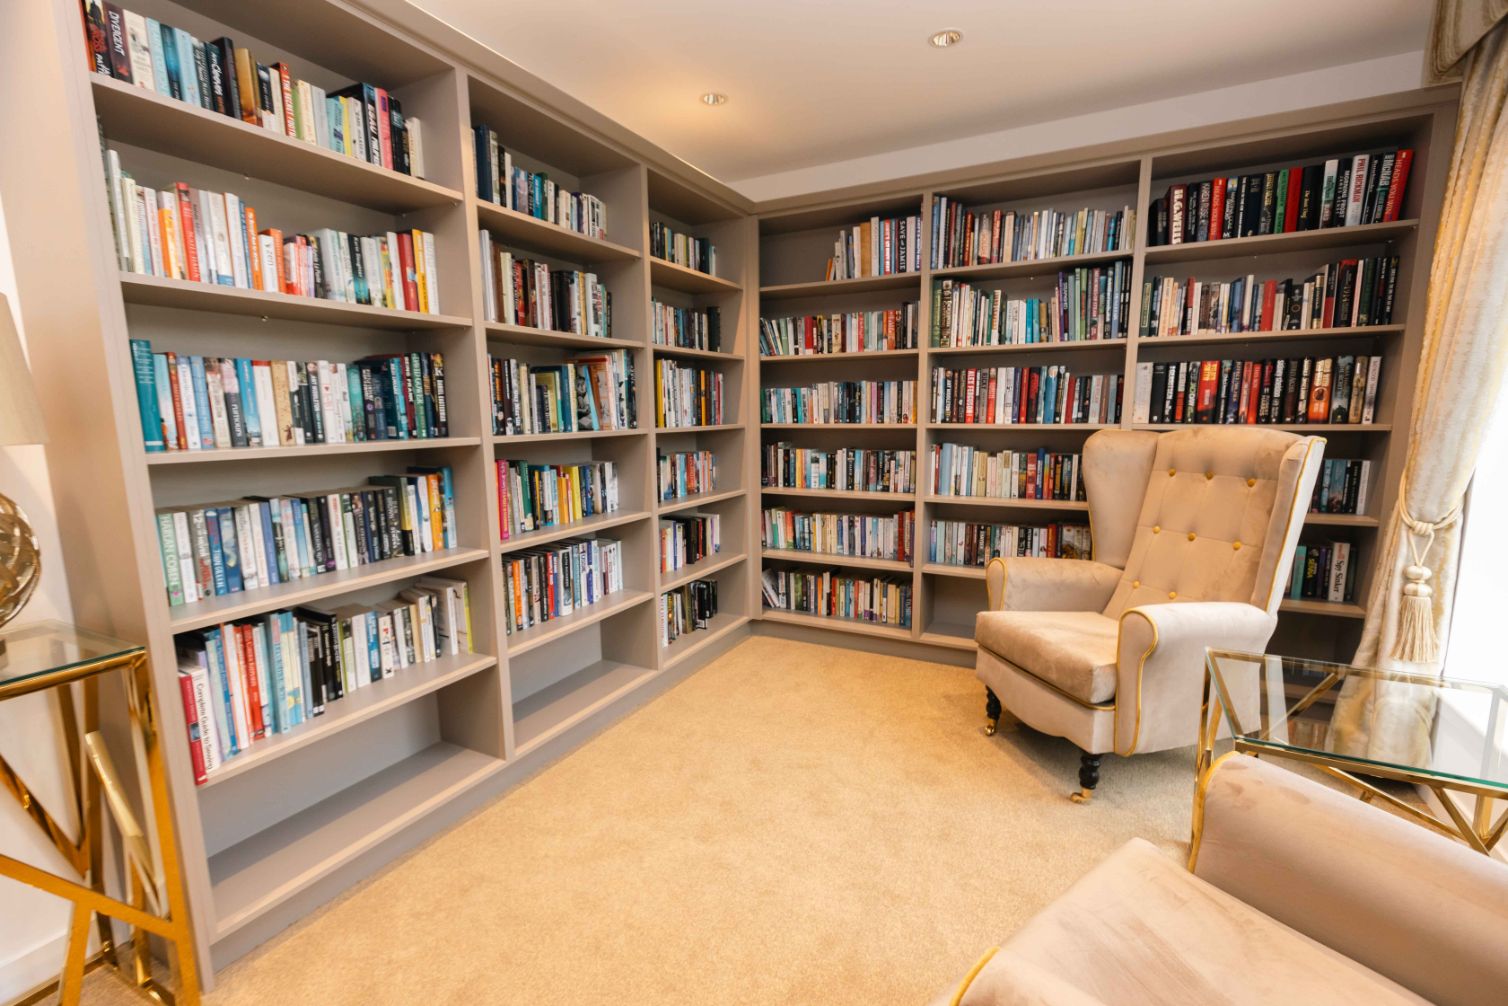 Book Shelves in Library